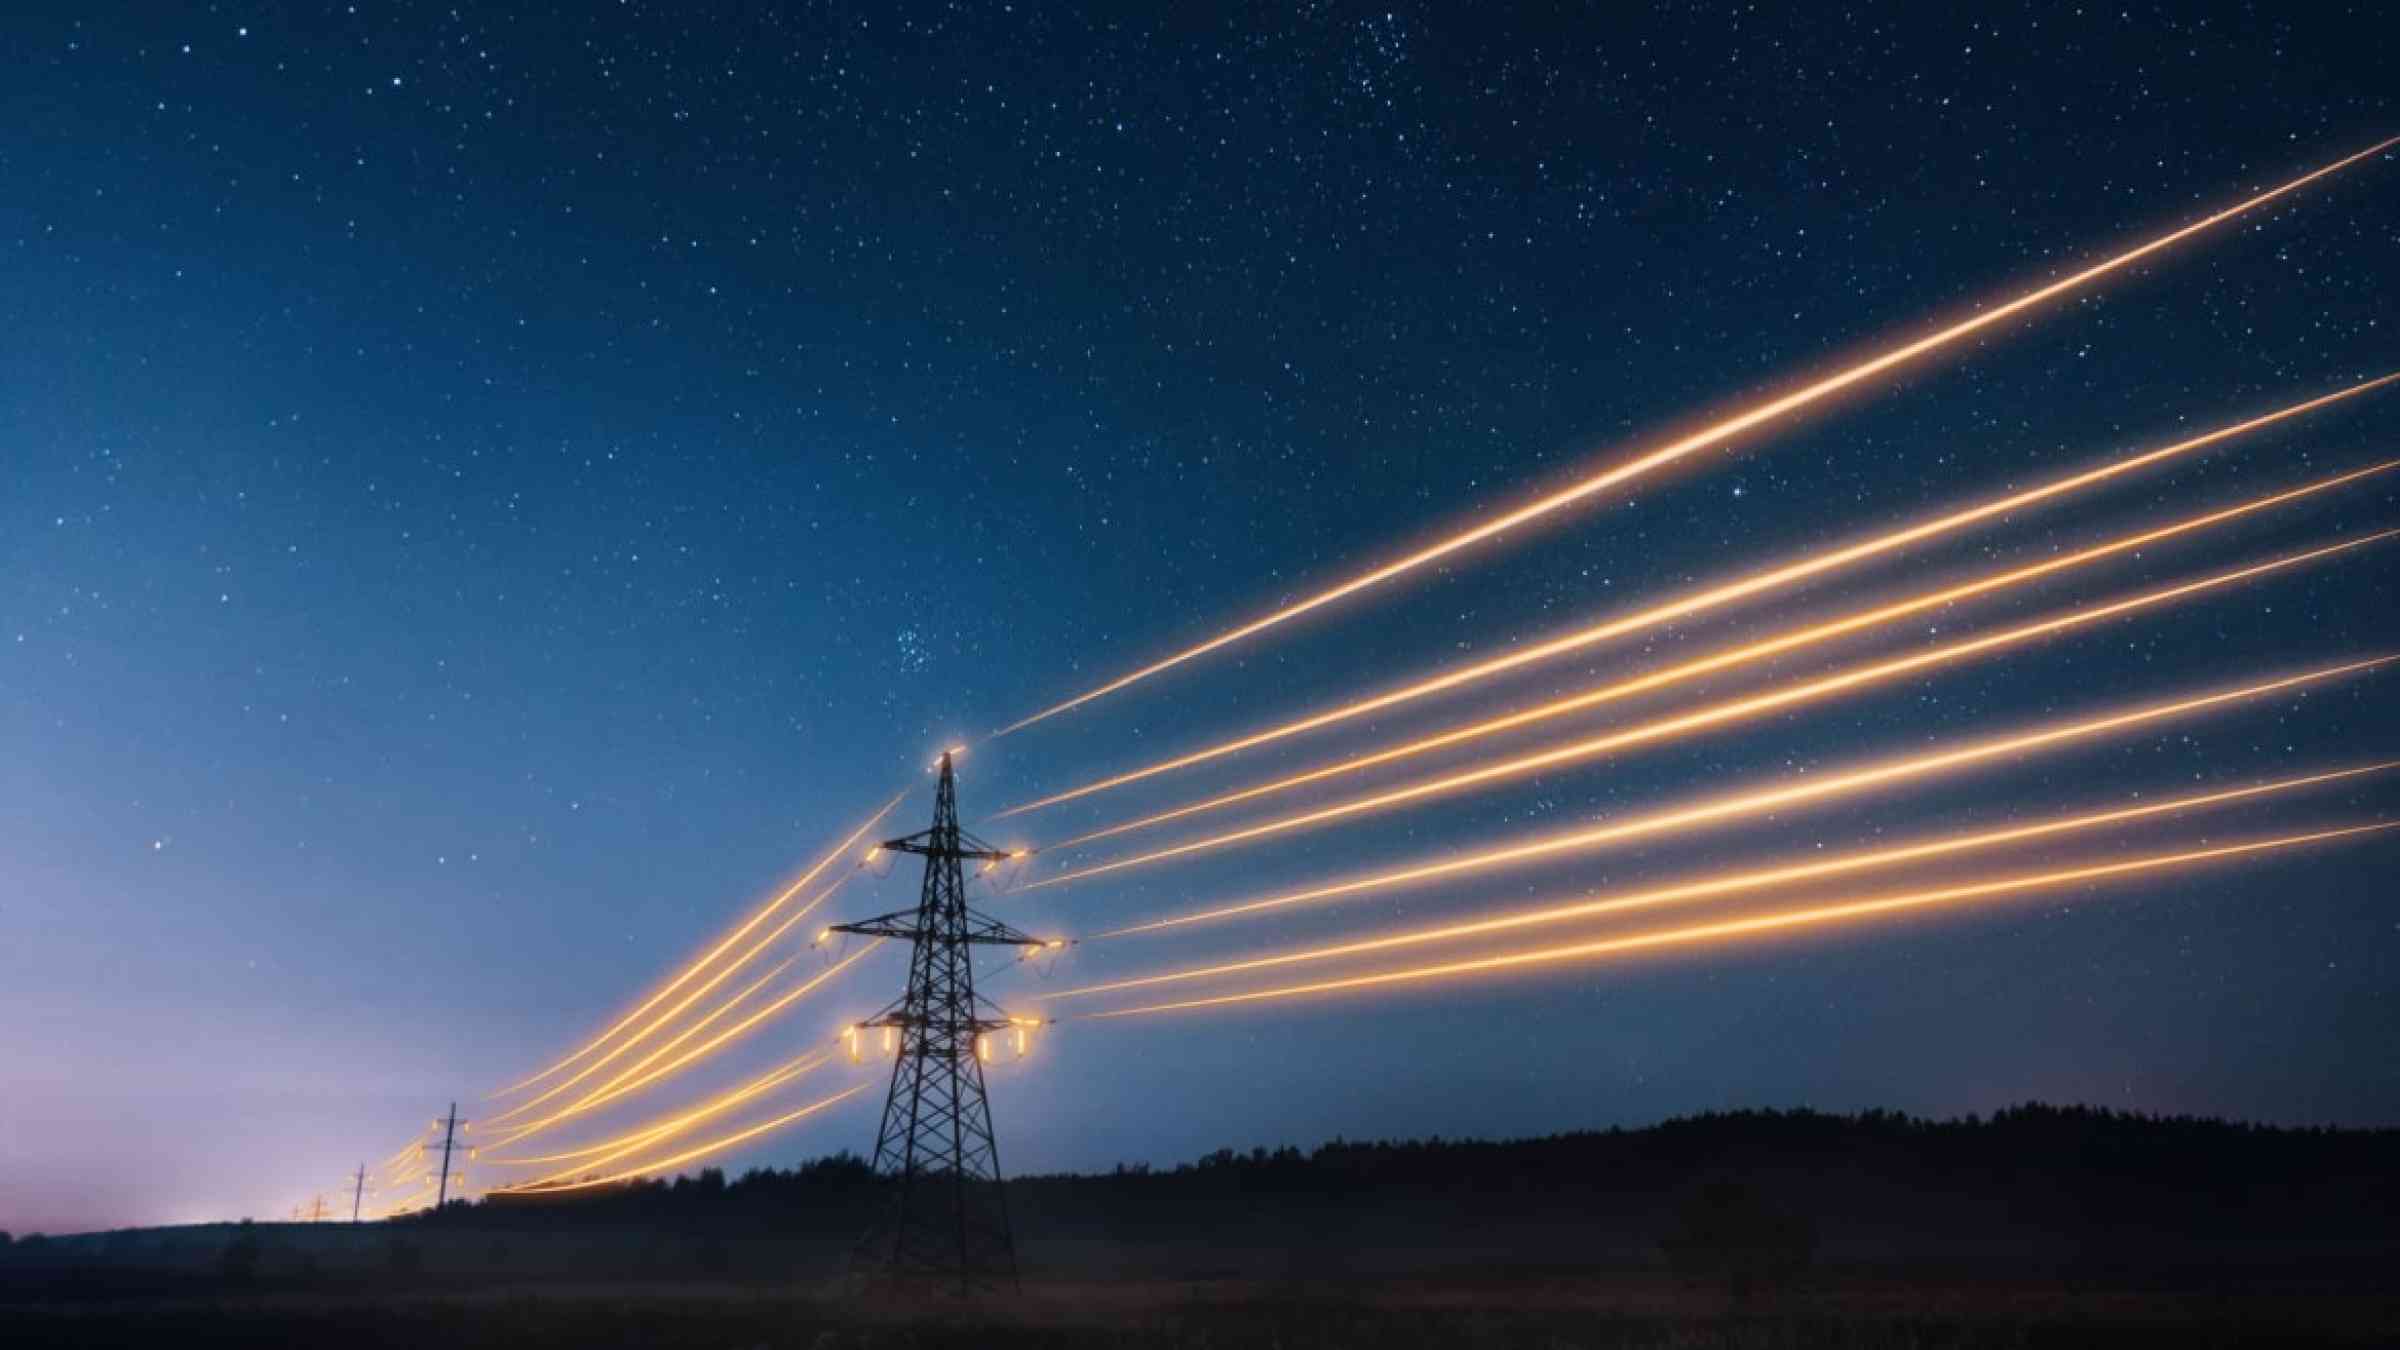 Power transmission towers with orange wires in the starry sky. Power infrastructure concept.